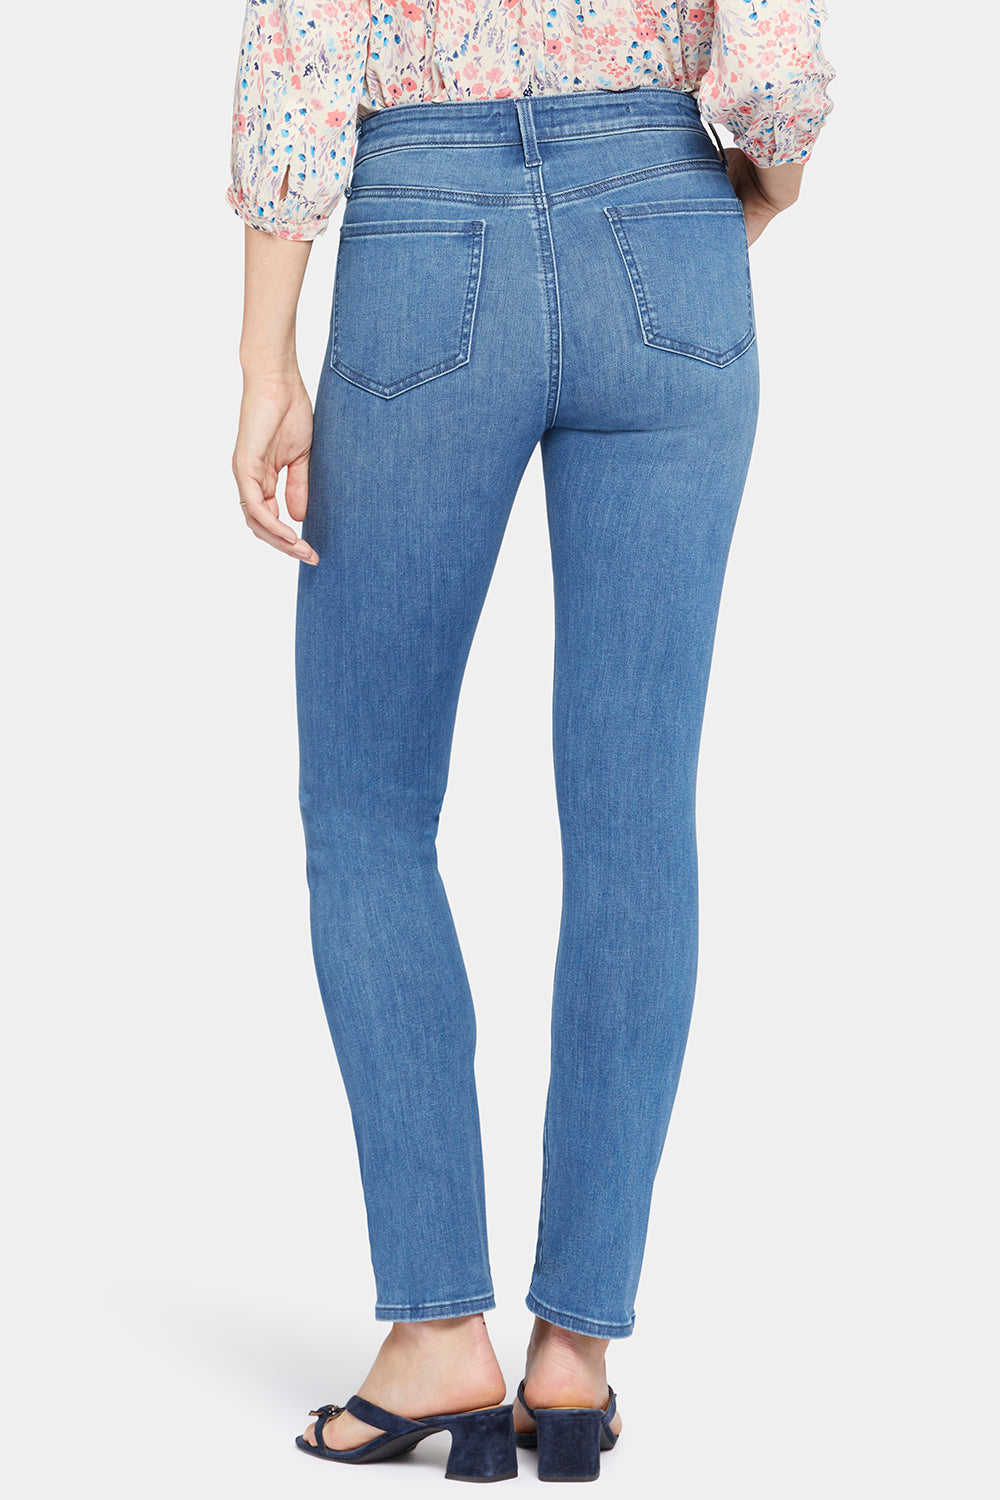 NYDJ Le Silhouette Sheri Slim Jeans In Tall With 34